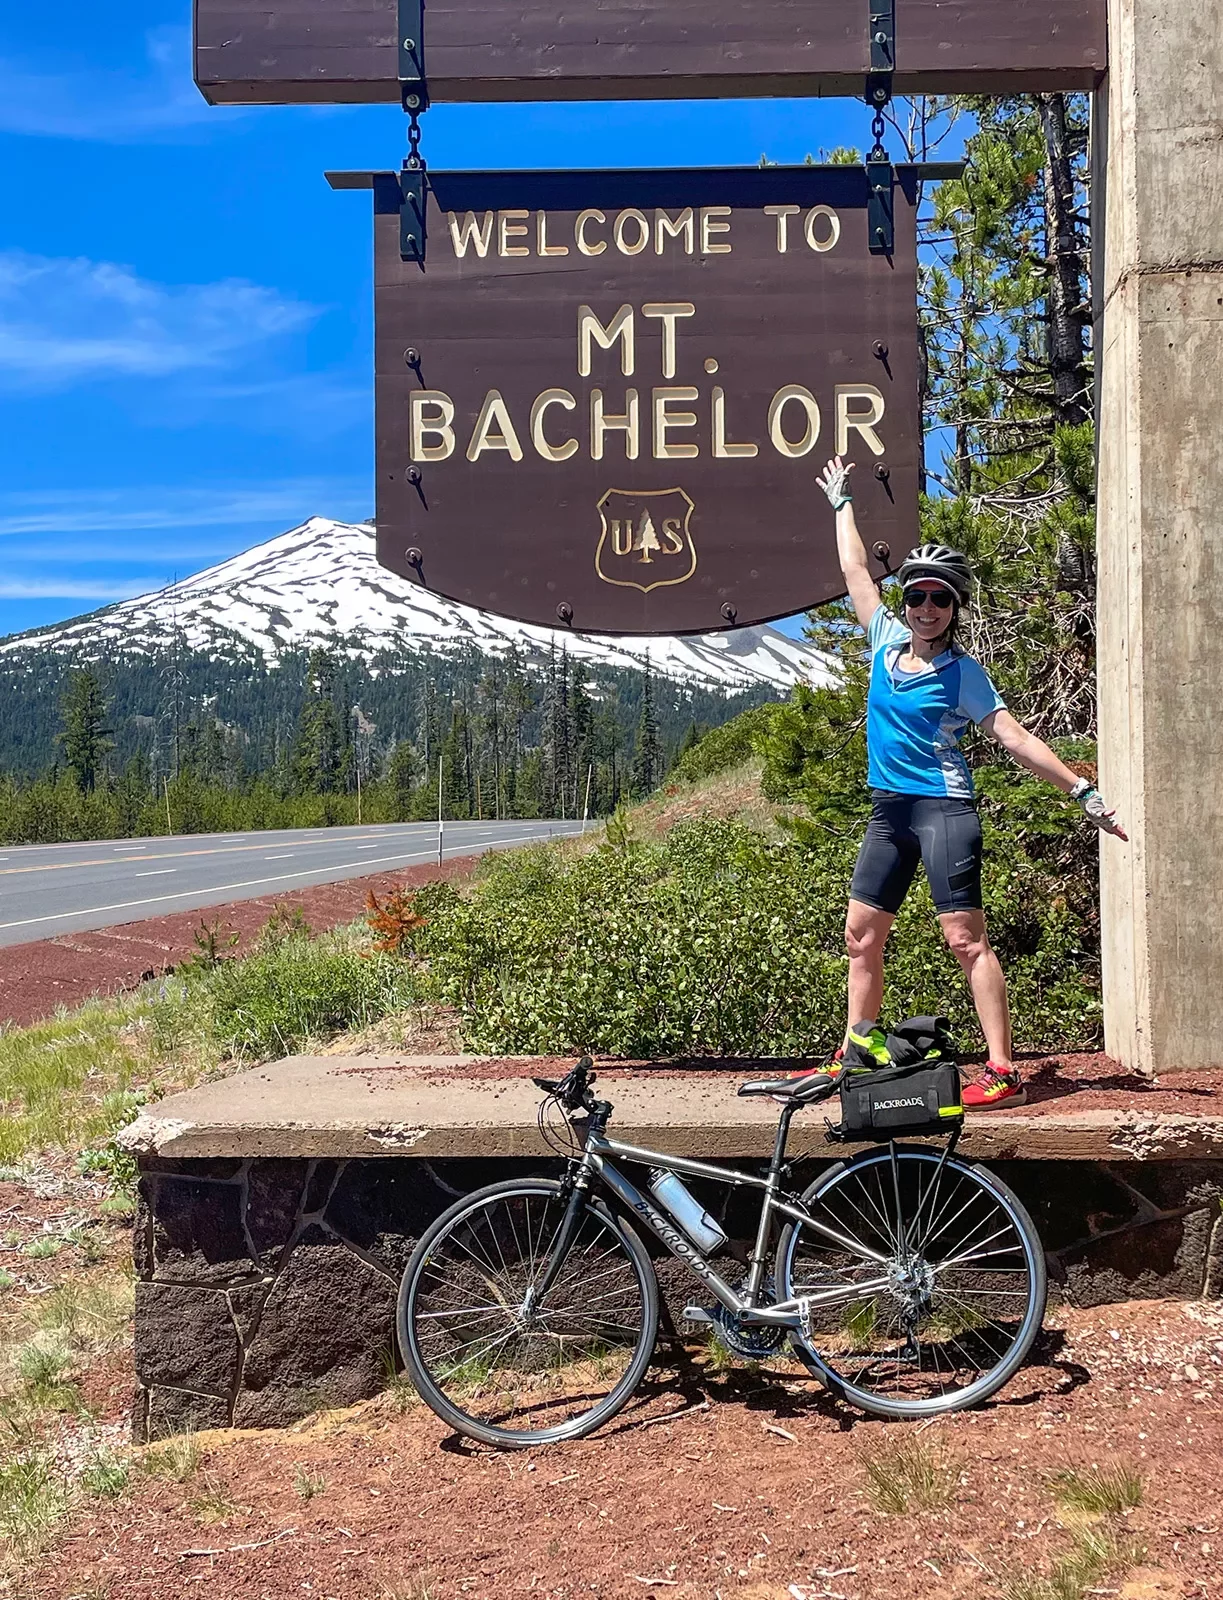 Guest posing with the &quot;WELCOME TO MT. BACHELOR&quot; sign.